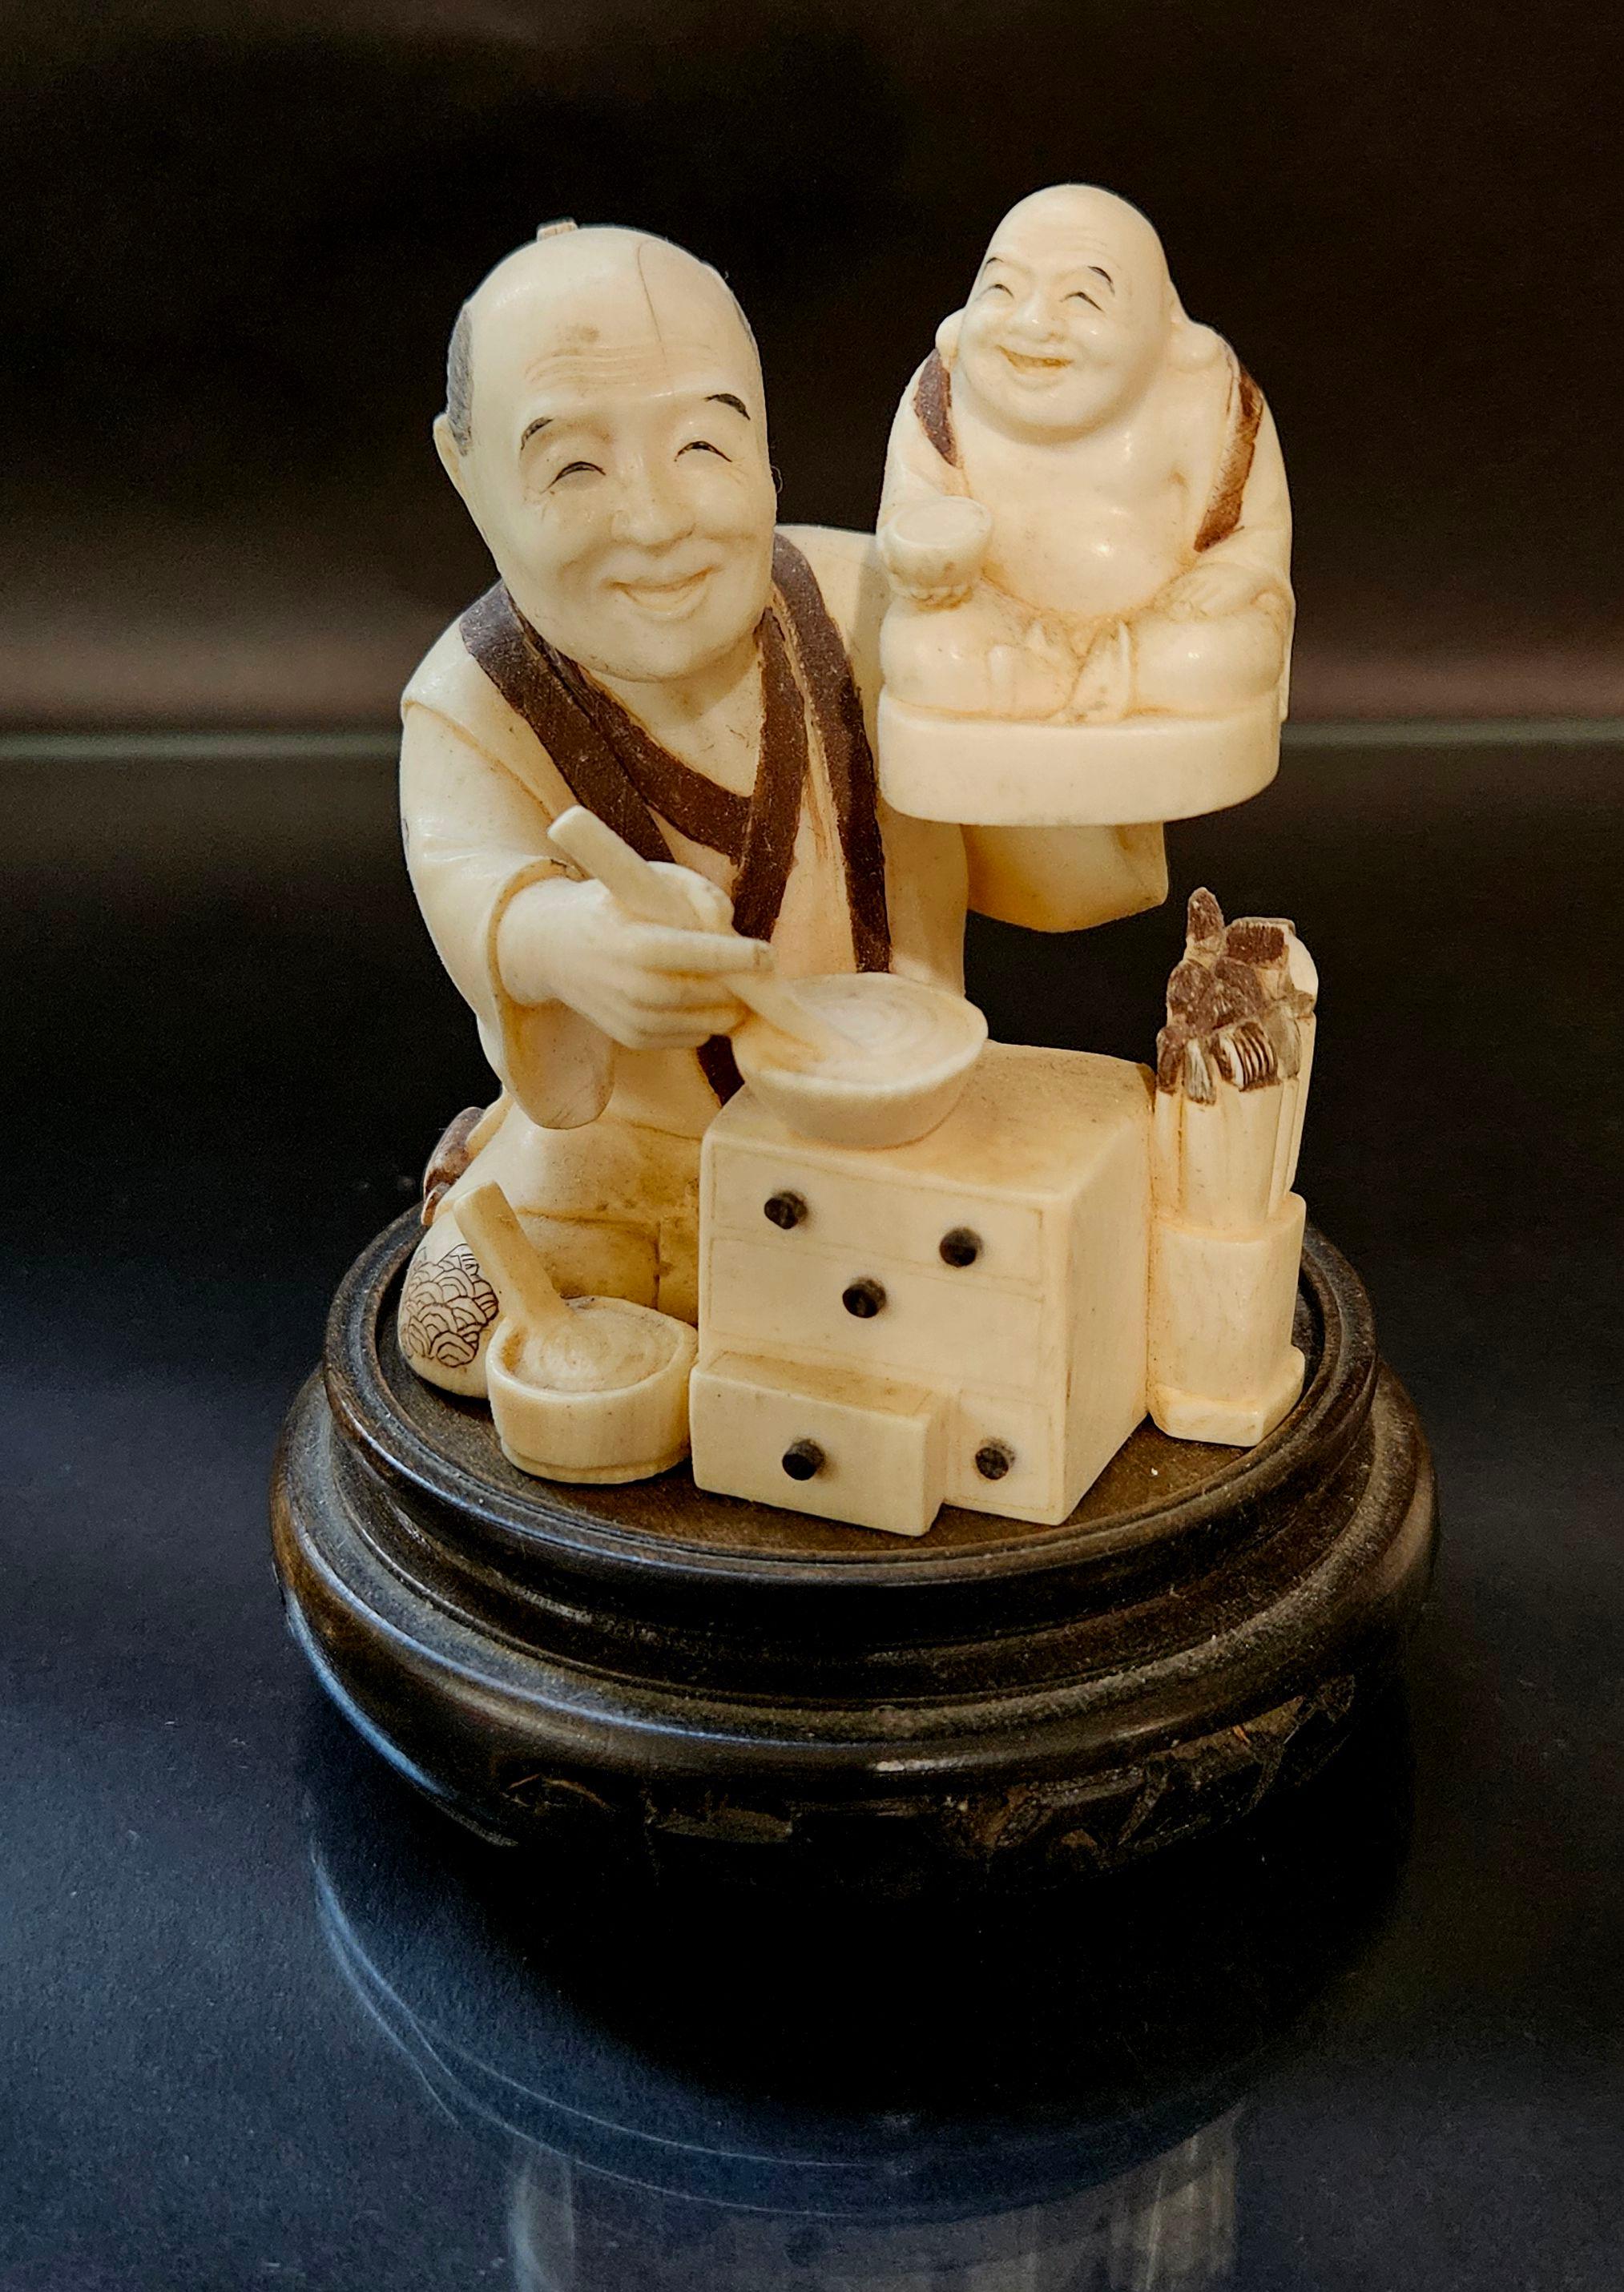 Antique Japanese Carved Okimono Polychrome Decorated Figure Group seated on a wood stand, signed by Gyokko,  depicting a seated artisan carving and decorating a figure of a happy Buddha, having tea-stained accents and signed to the underside, raised